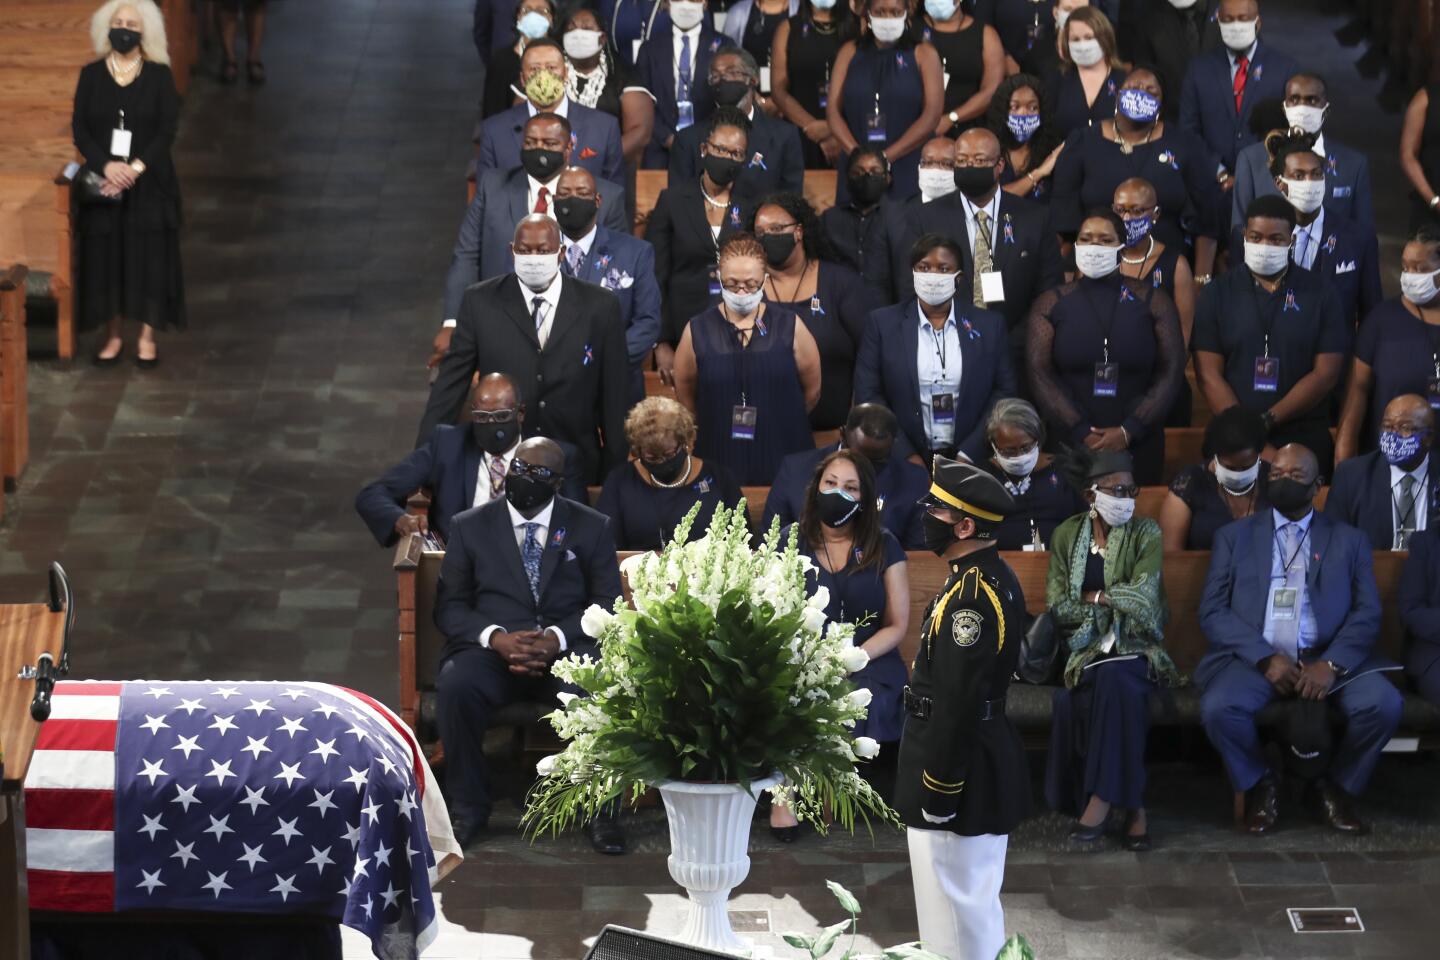 Mourners attend the funeral service for Rep. John Lewis at Ebenezer Baptist Church in Atlanta.